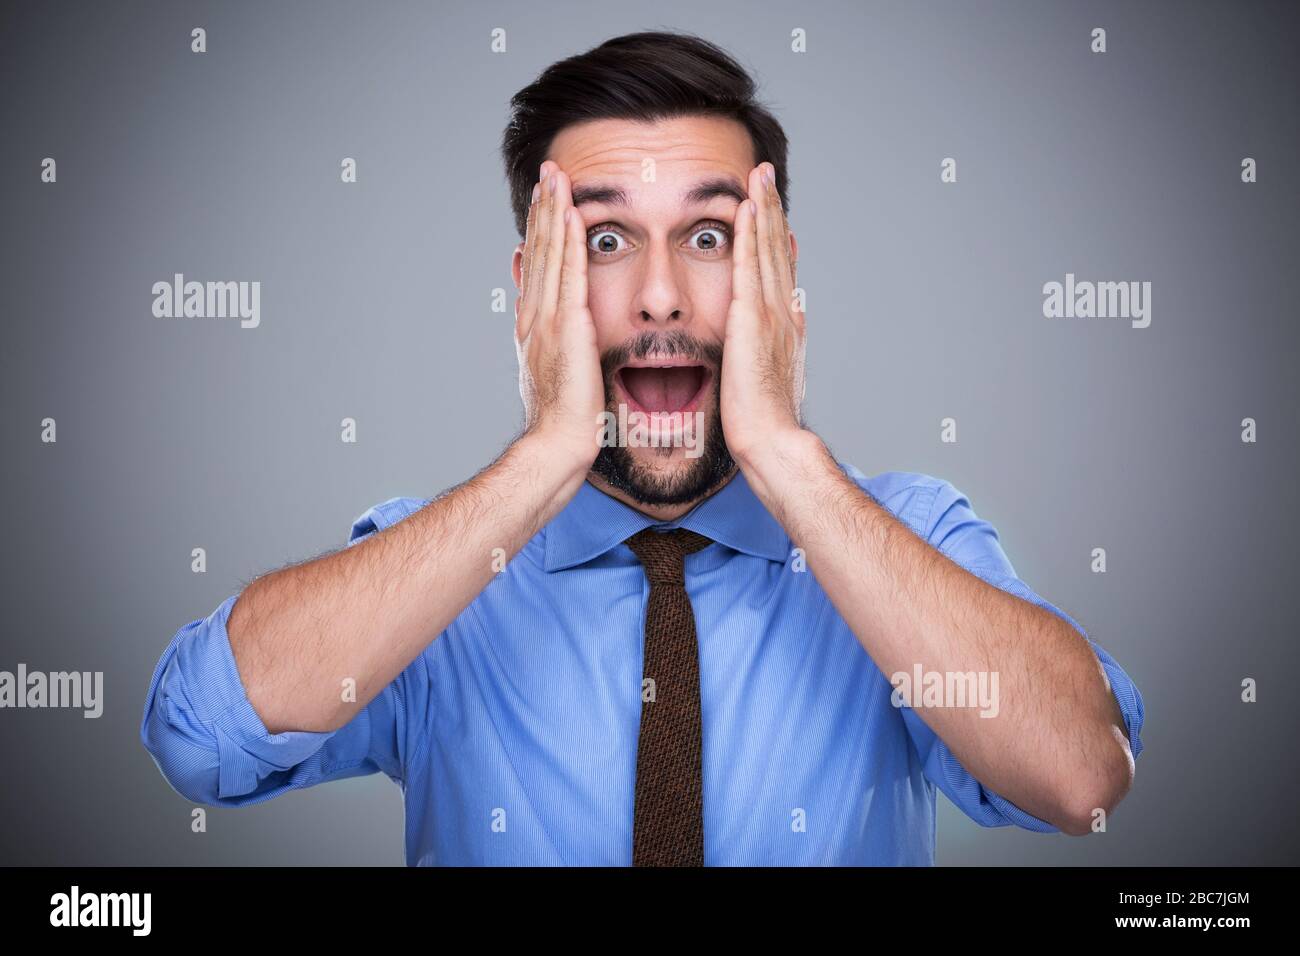 Shocked young man Stock Photo